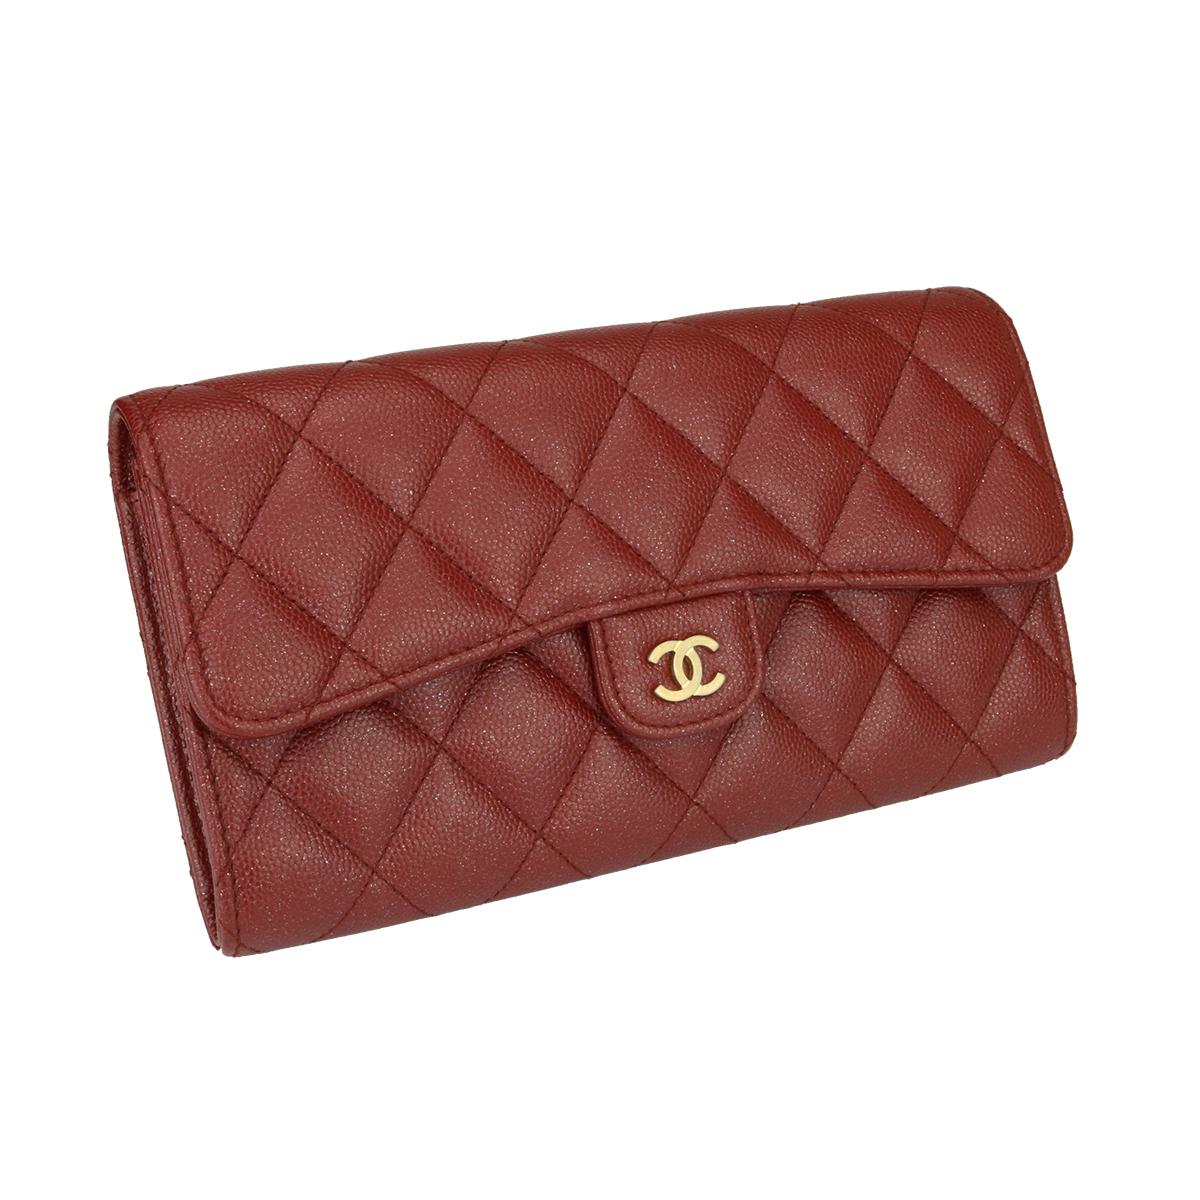 Women's or Men's CHANEL Flap Wallet Burgundy Caviar Iridescent with Brushed Gold Hardware 2018